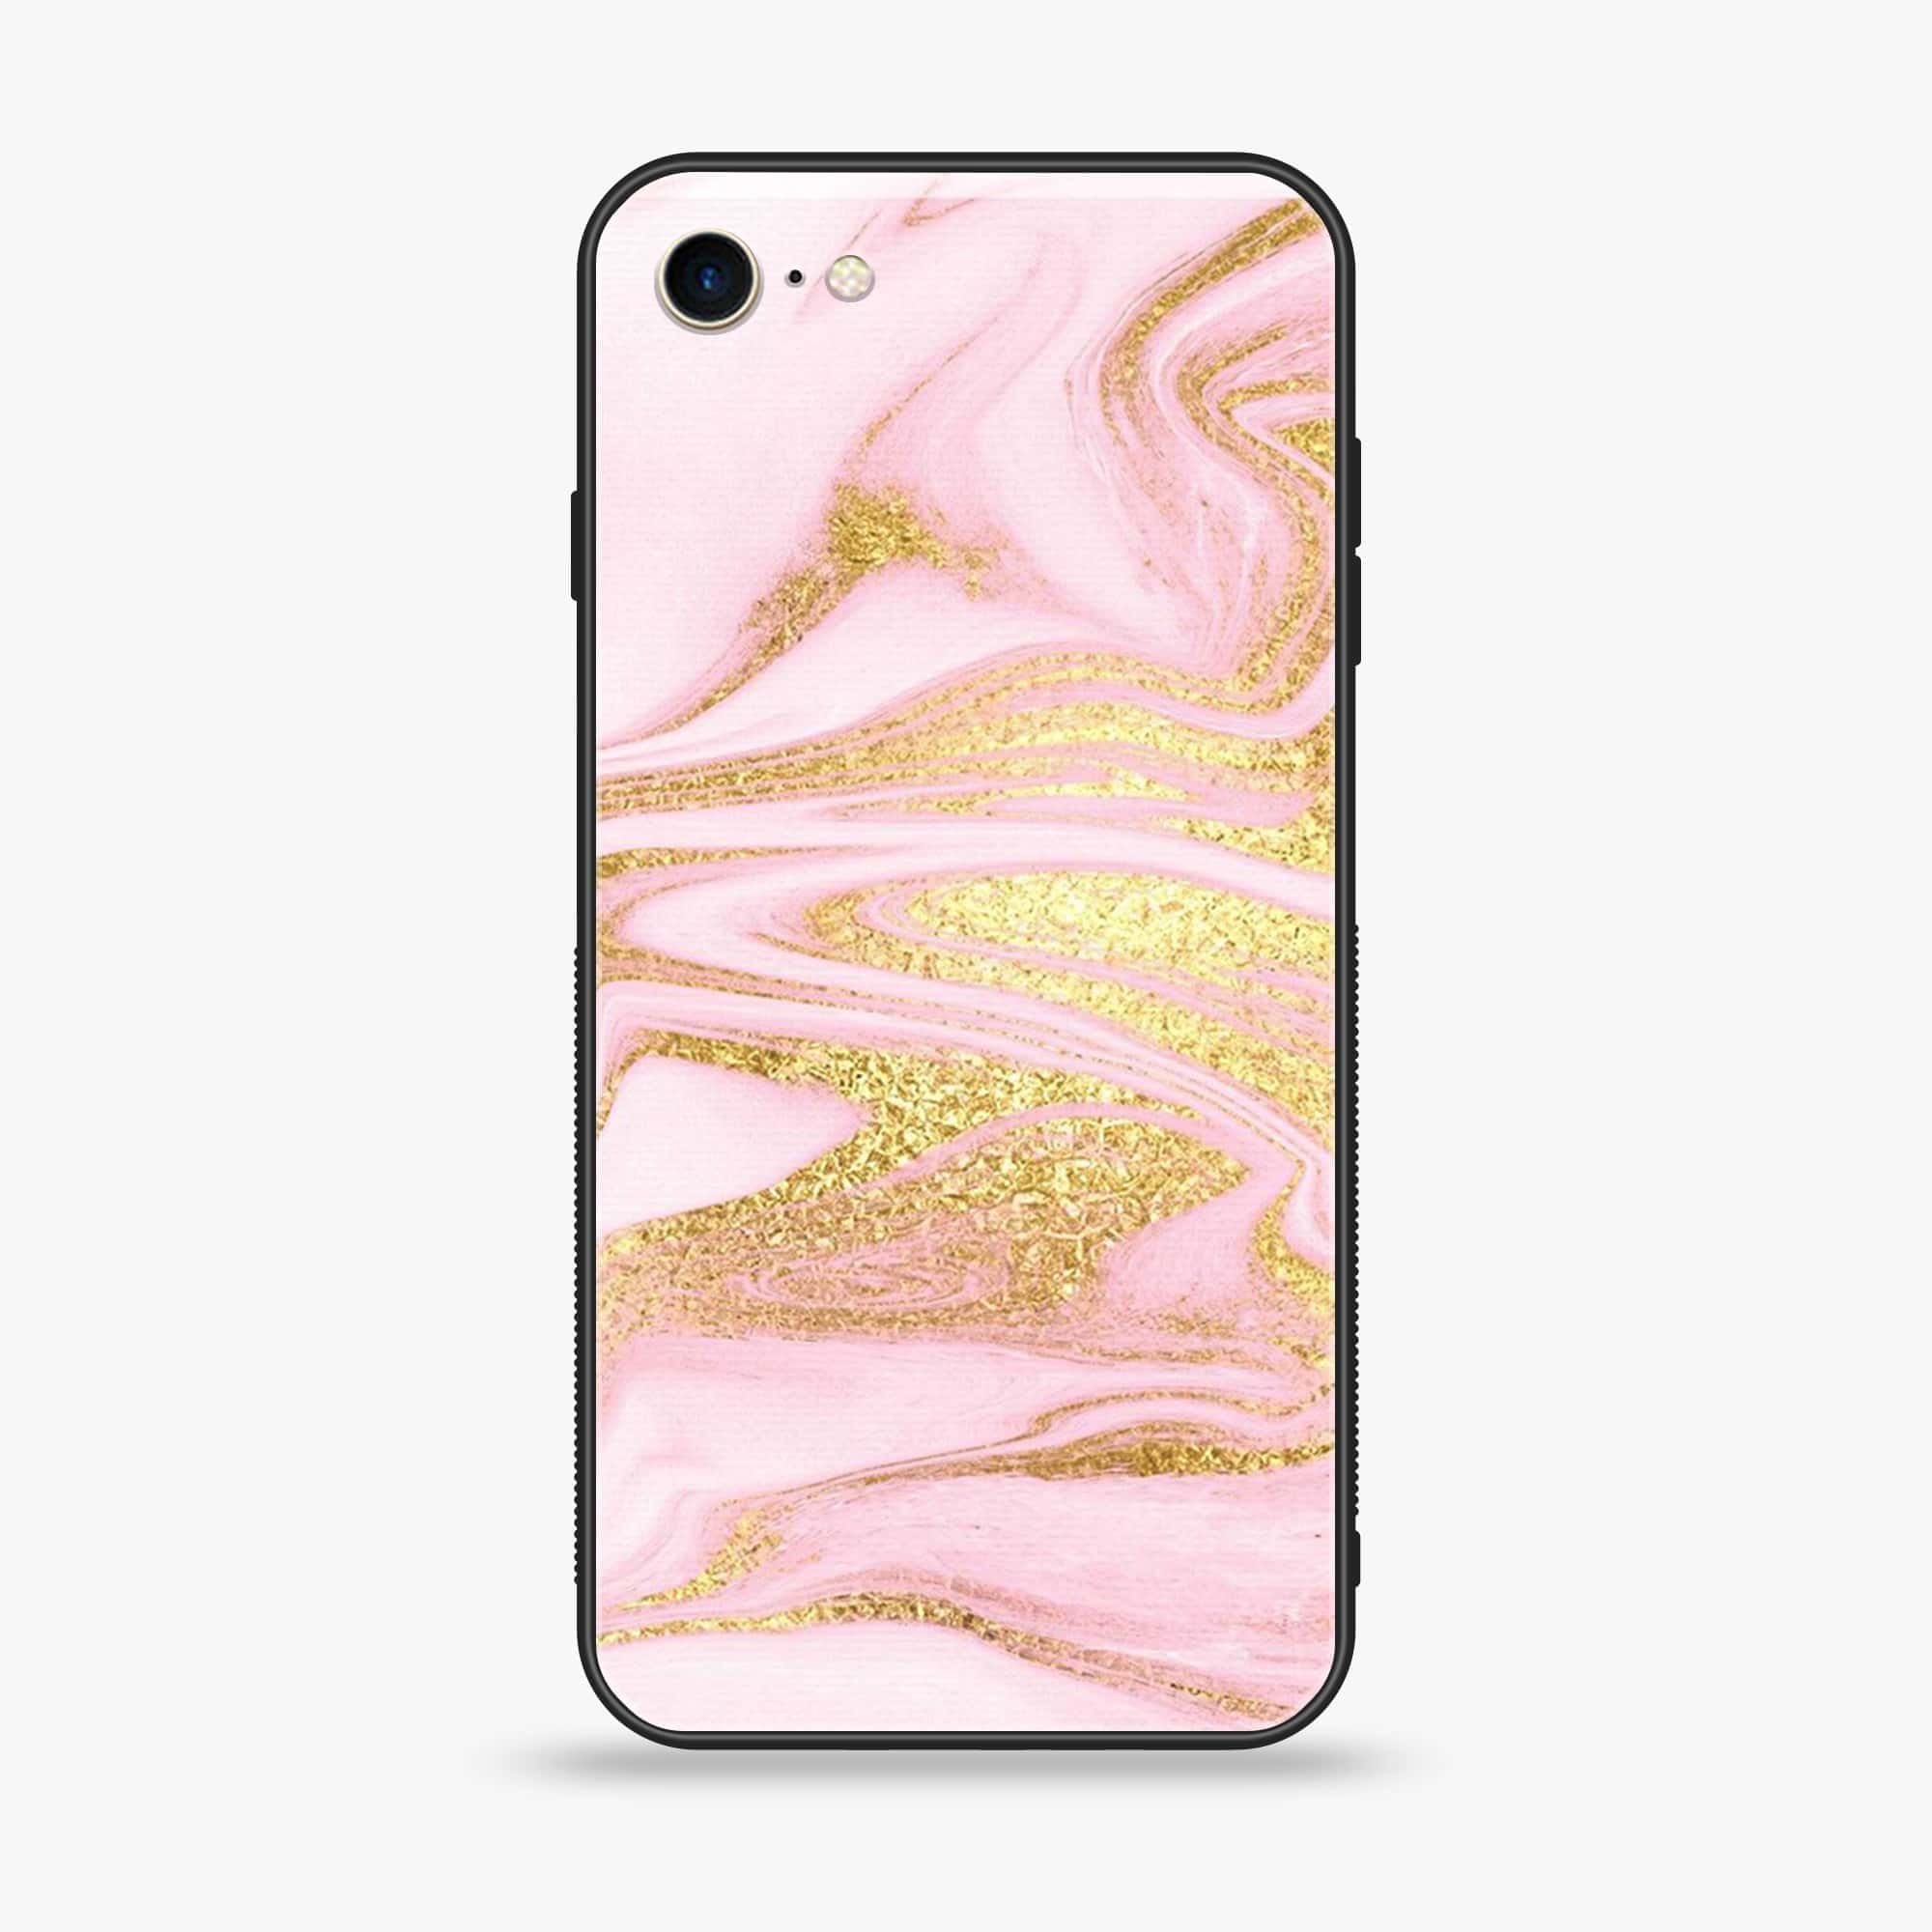 iPhone SE 2020 - Pink Marble Series - Premium Printed Glass soft Bumper shock Proof Case